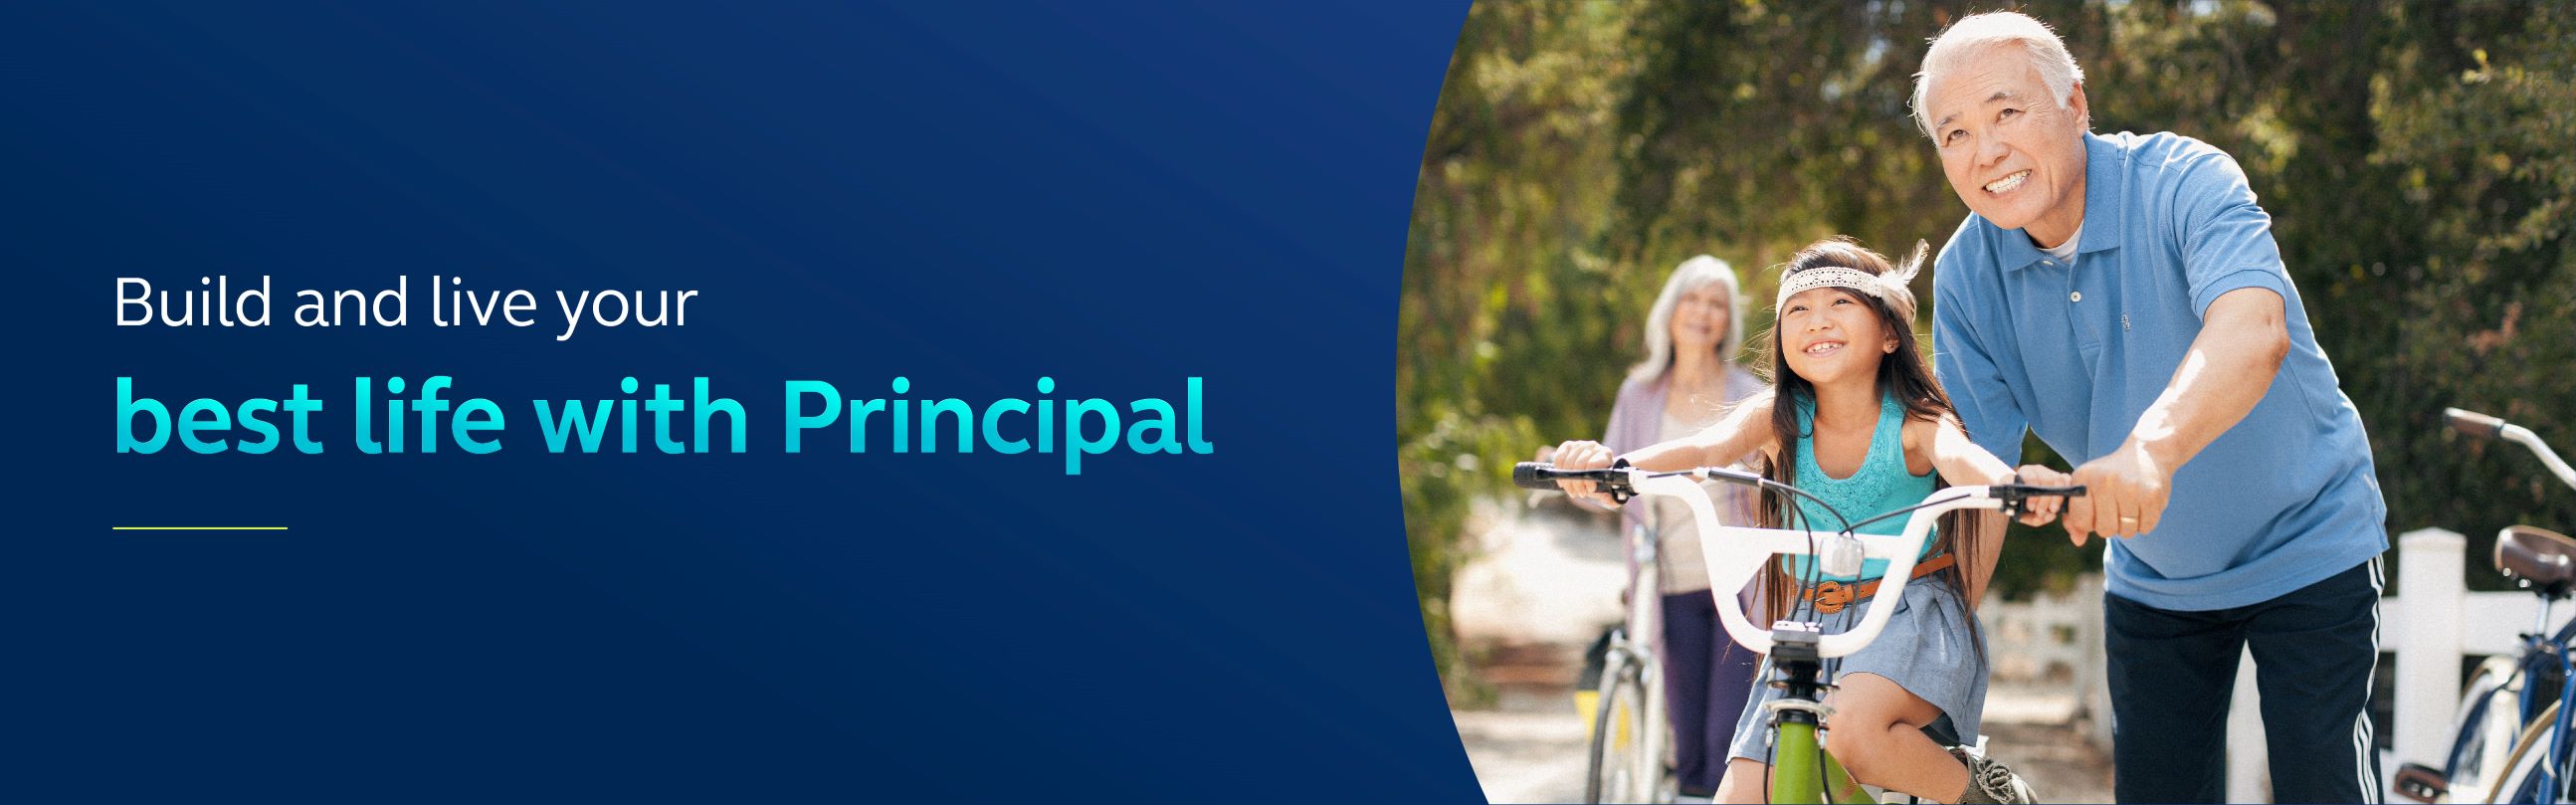 Build and live your best life with Principal 